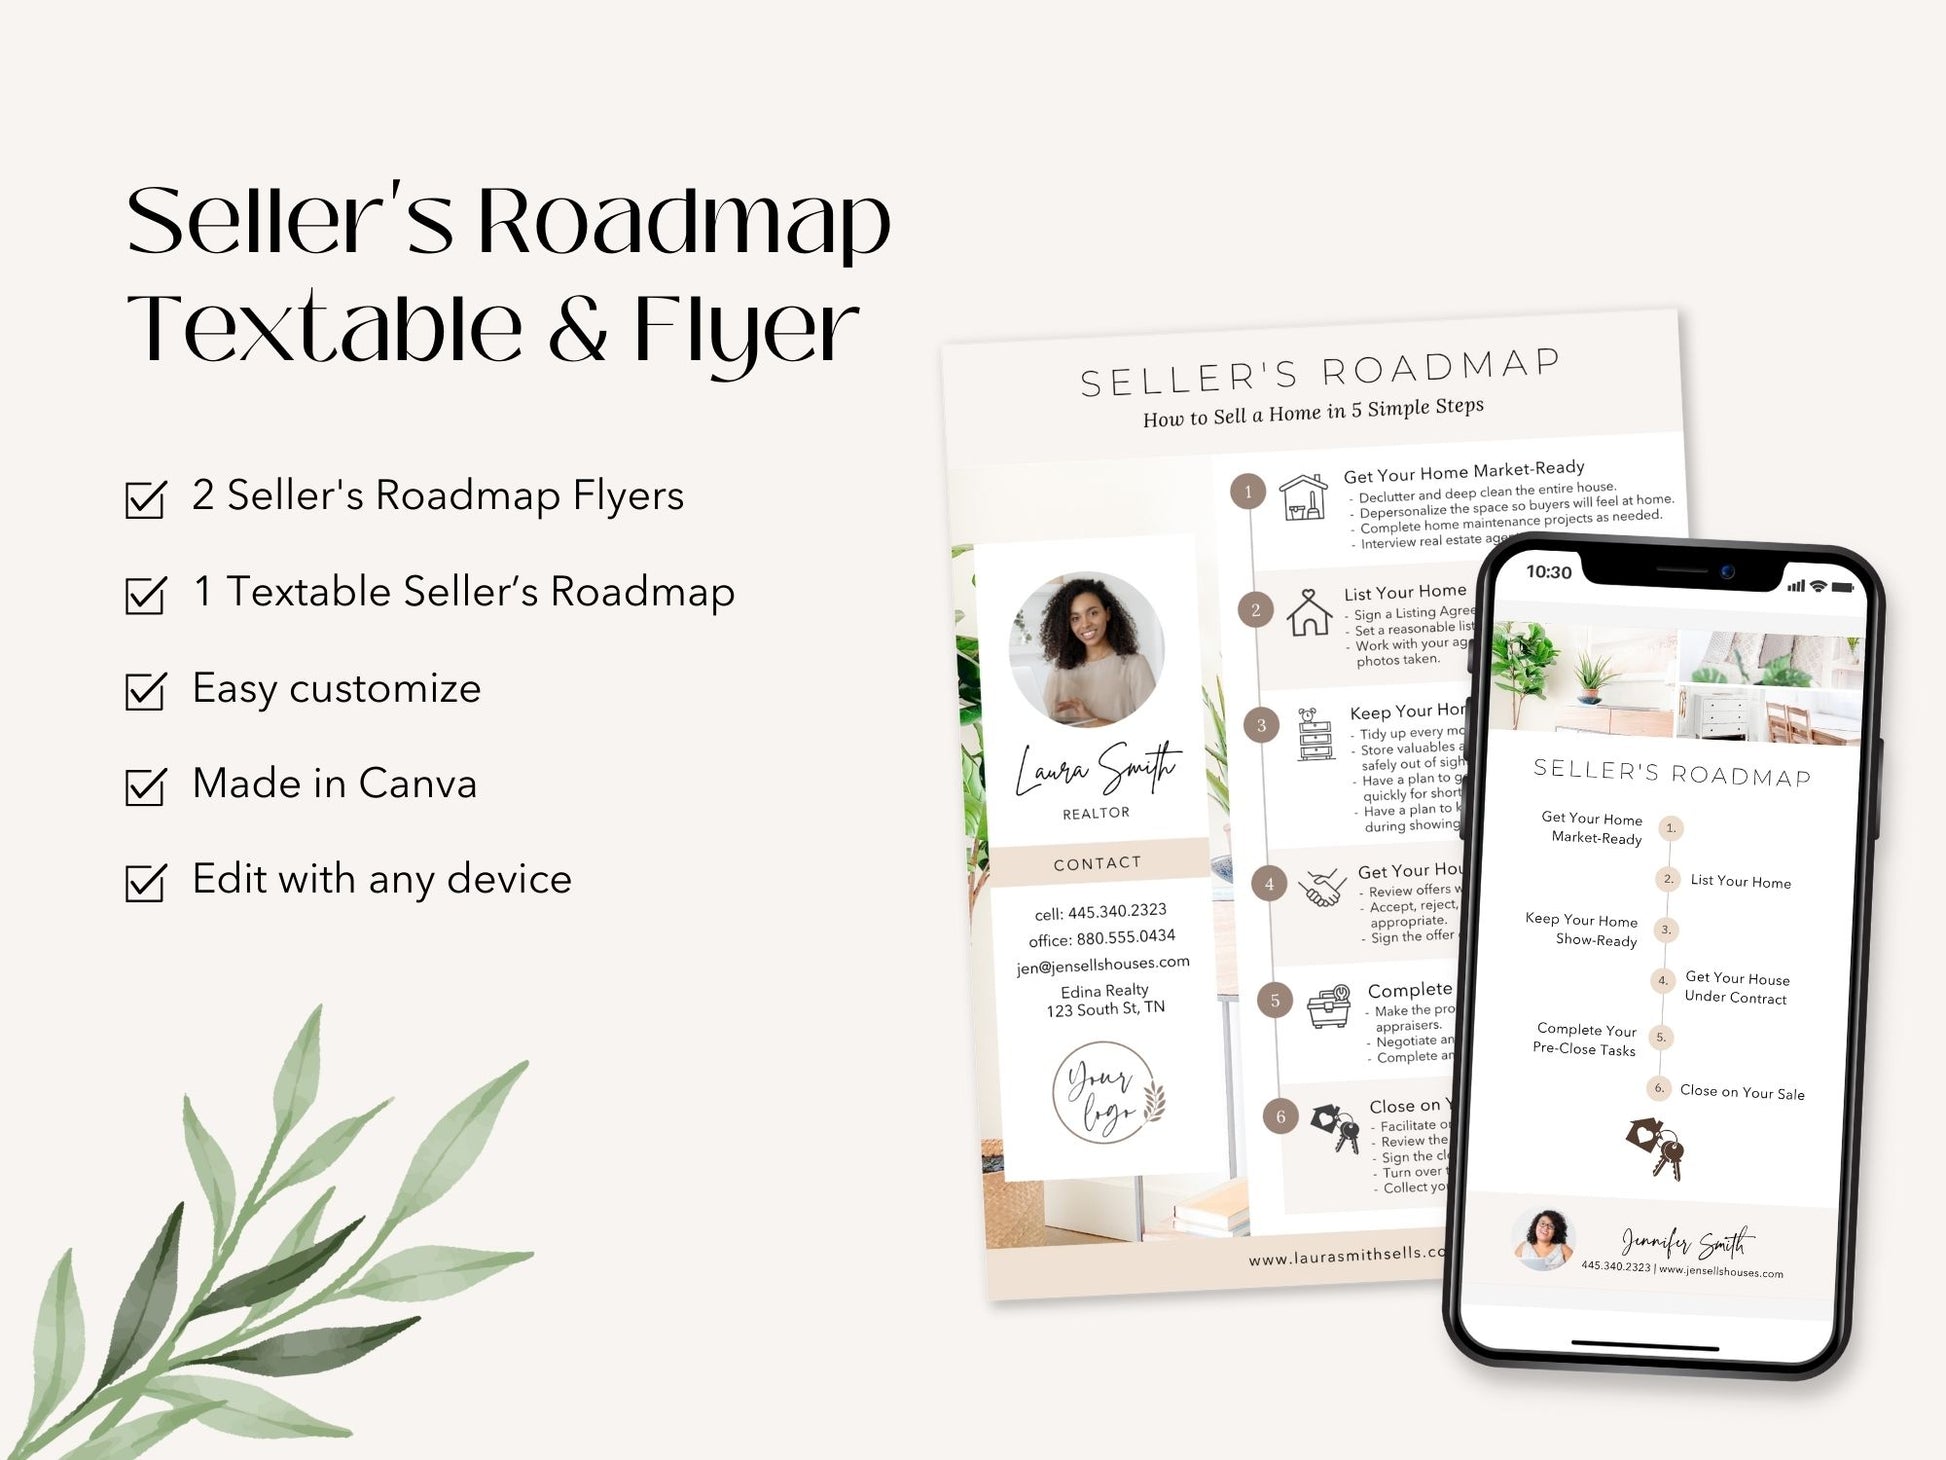 Home Seller's Roadmap Textable and Flyer Bundle Equip your home sellers with a detailed Seller's Roadmap and a convenient Textable Seller Roadmap for a seamless and successful home selling experience.